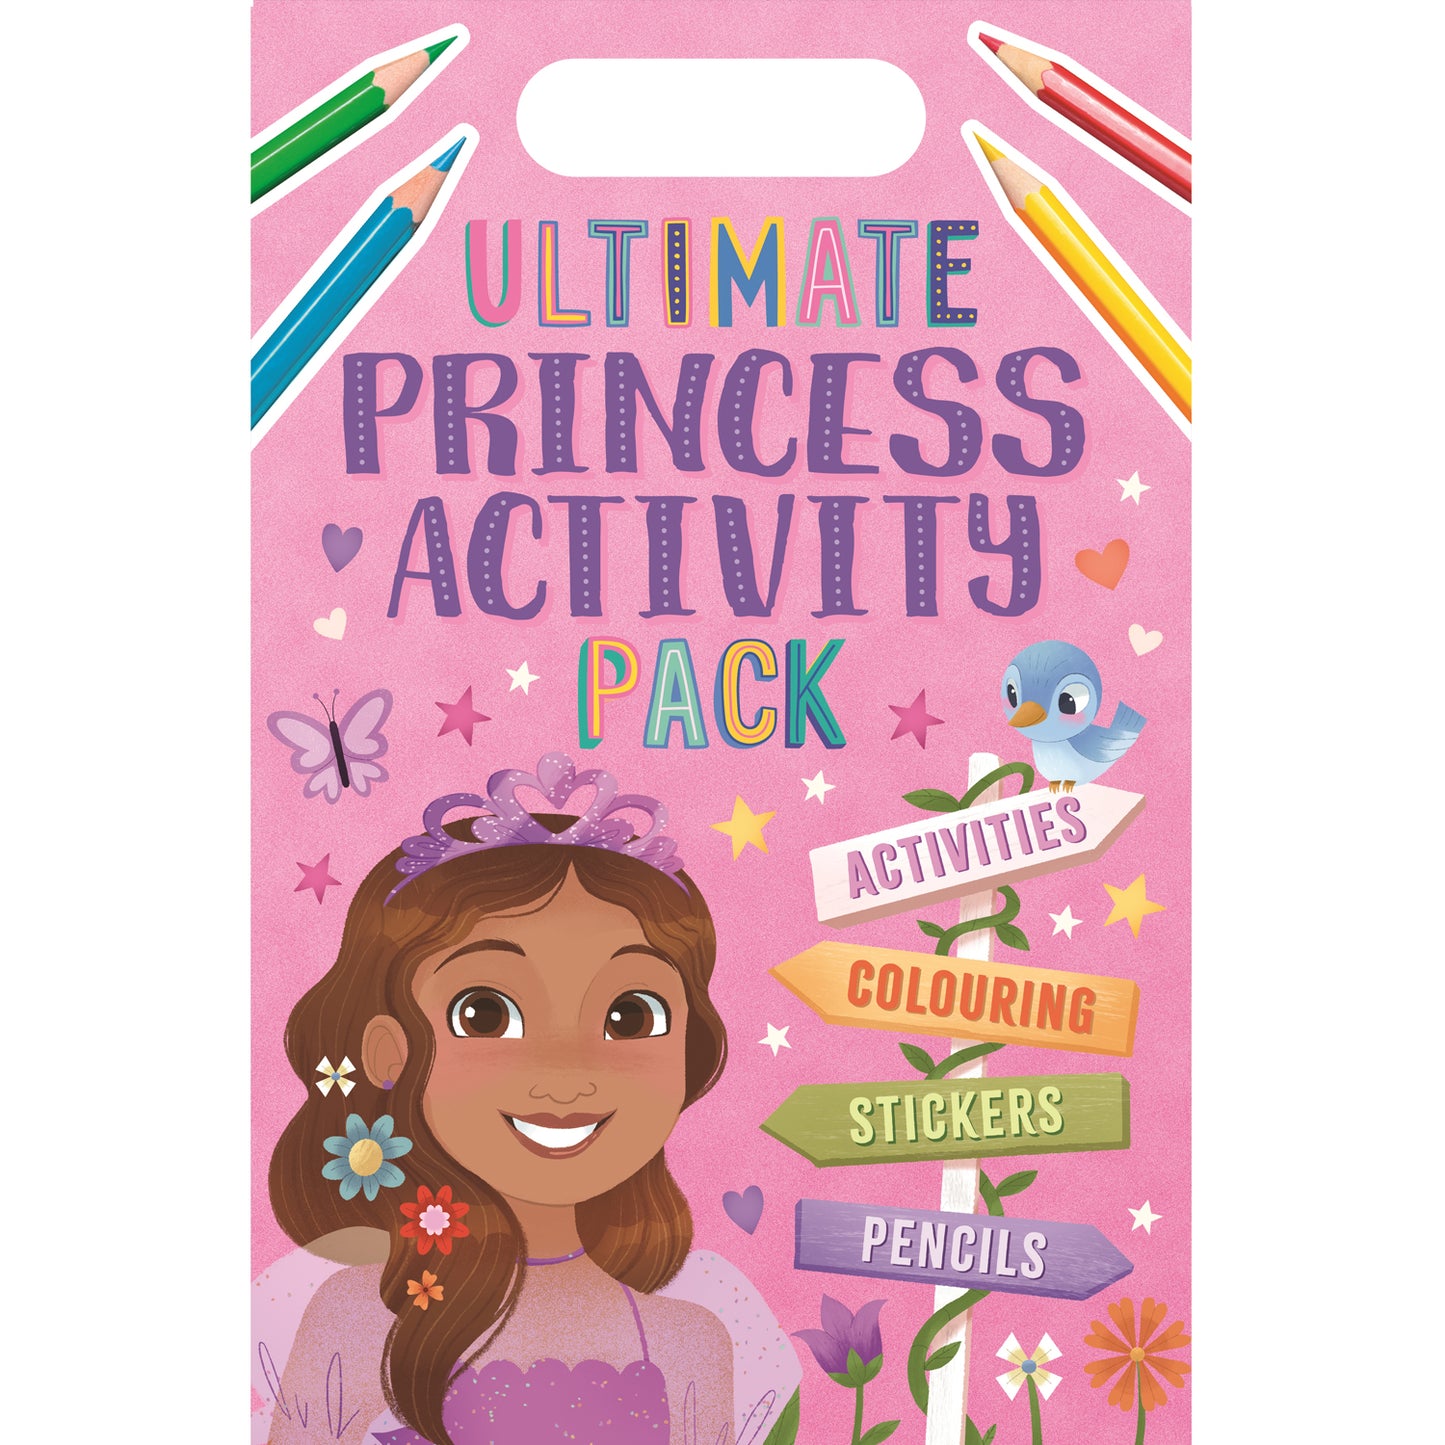 Ultimate Princess Activity Pack With Activities, Colouring, Stickers & Pencils [Hardcover] Parragon